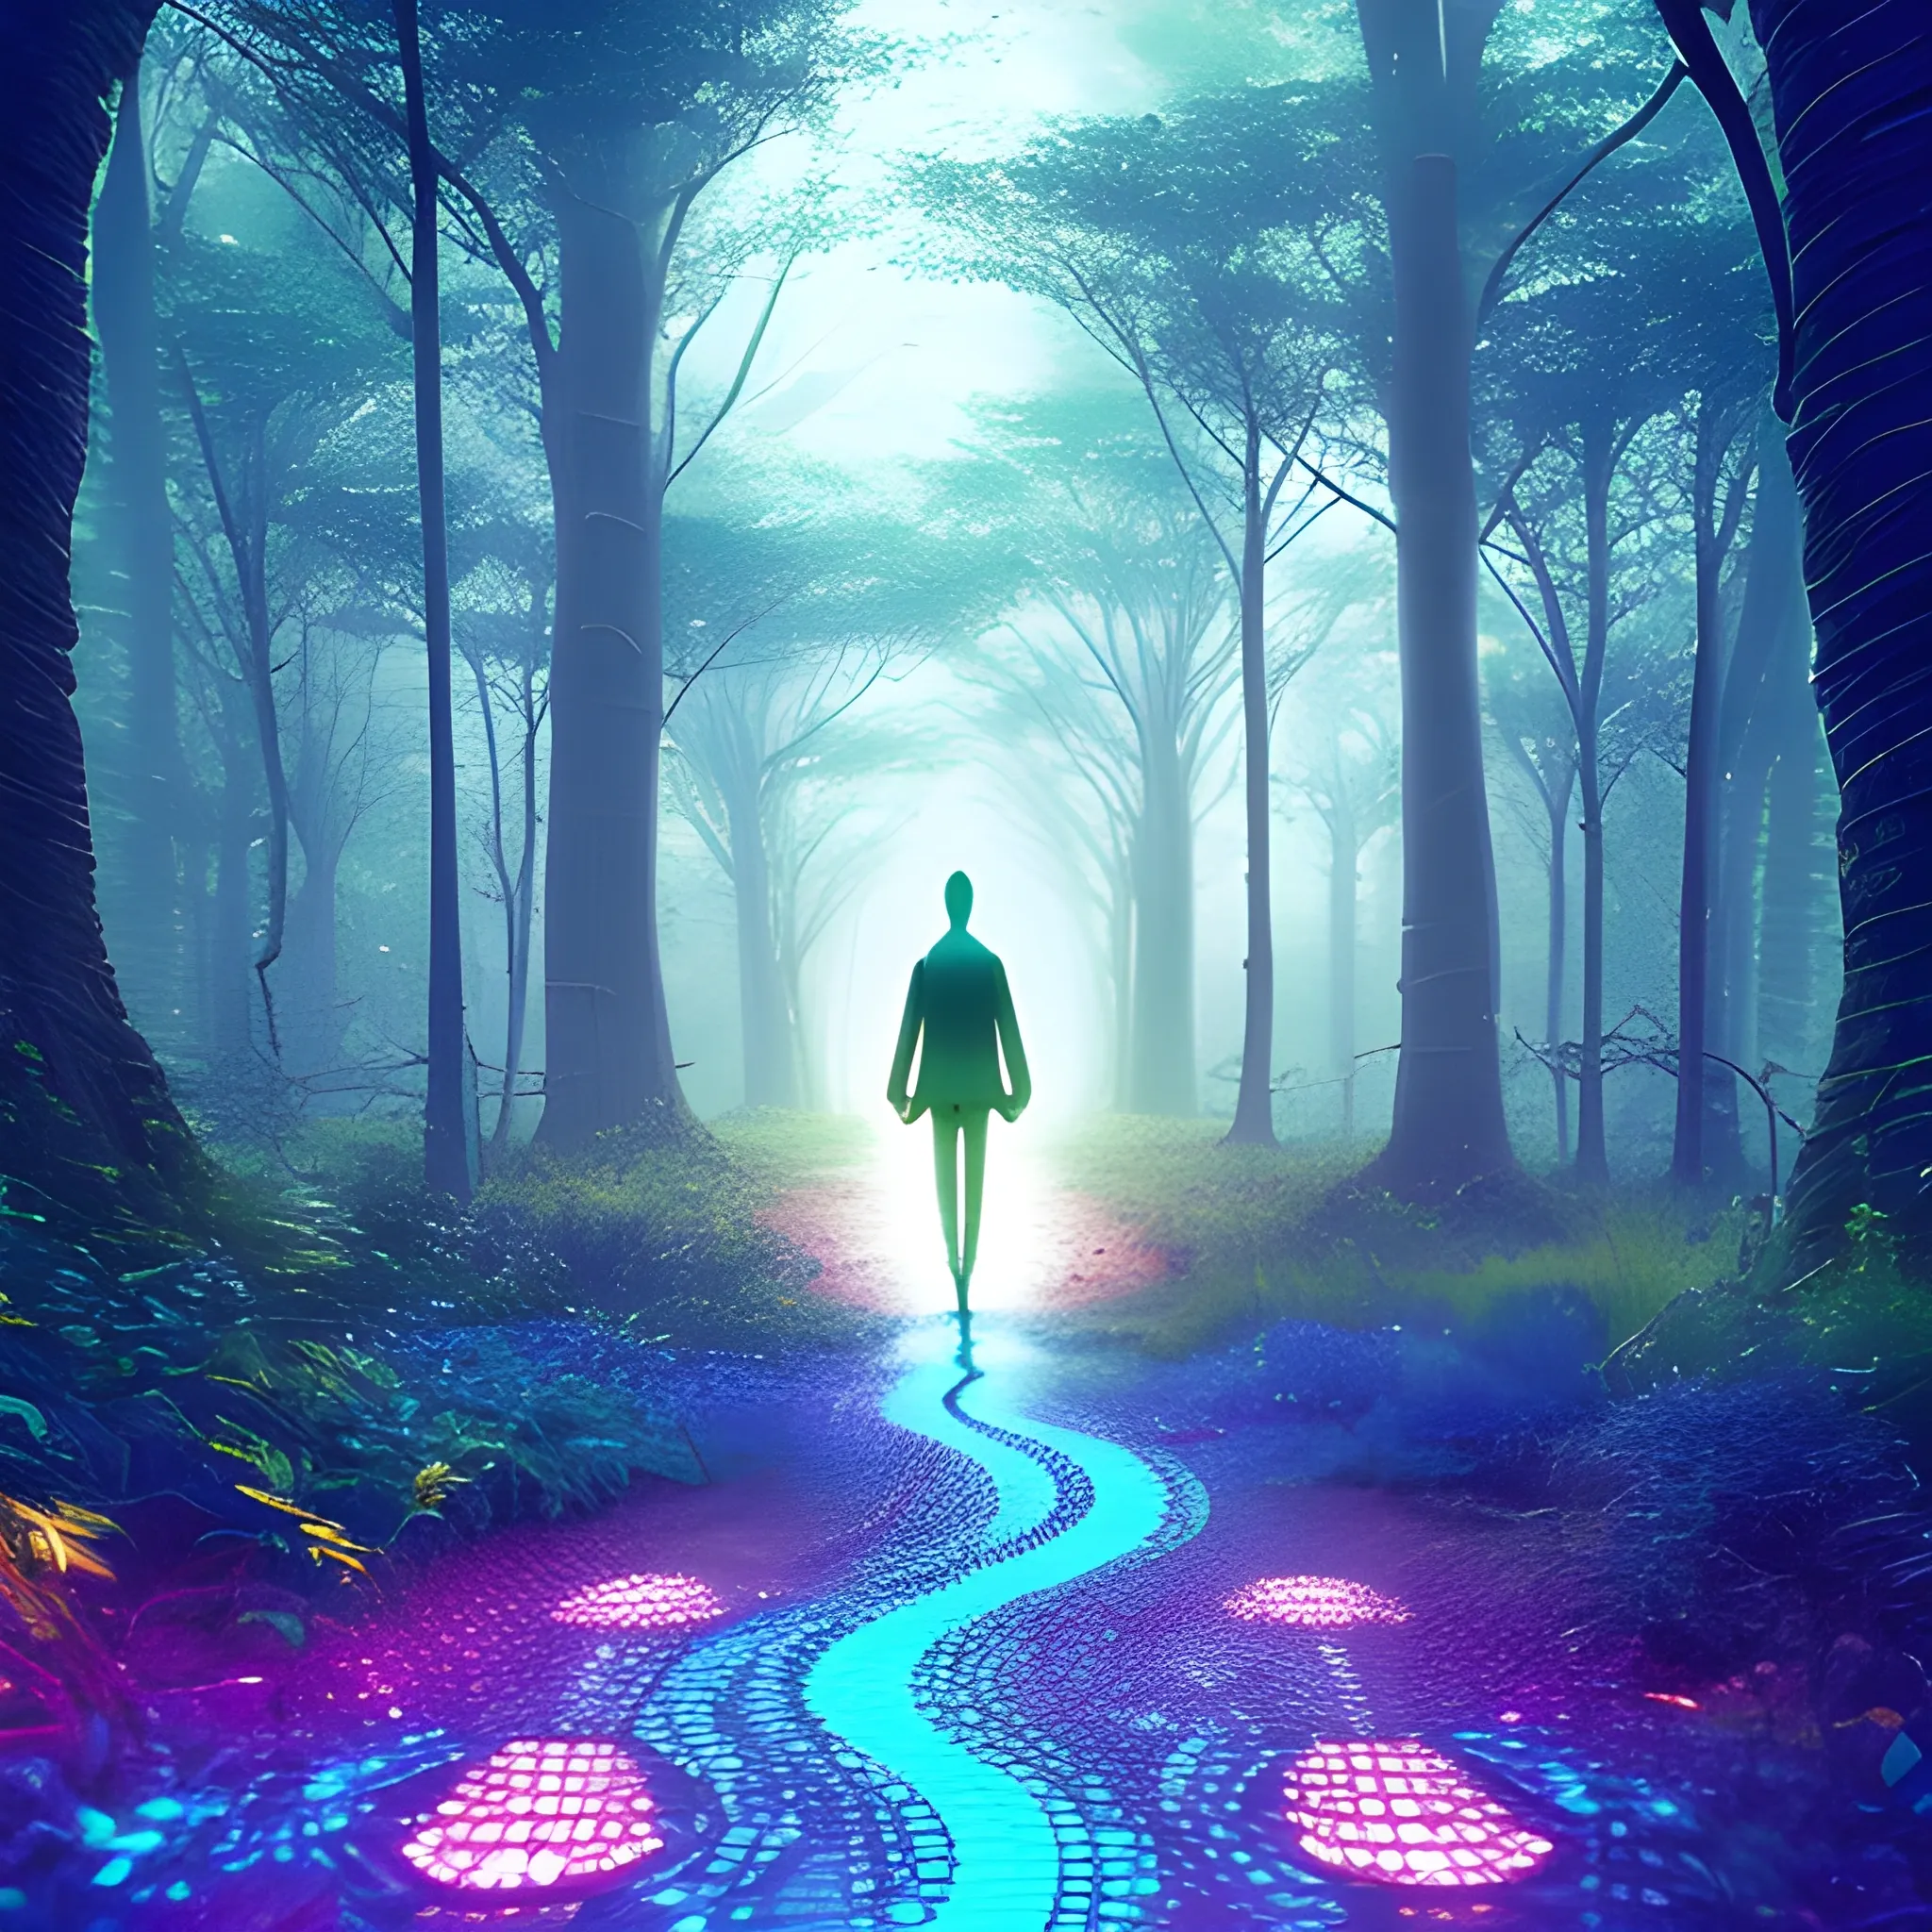 A path that leads to new pathways, human walking
in the light, journey towards freedom, 8k, 3D,
realistic, bioluminescent, fantasy, , Trippy, Trippy, trippy trippy trippy trippy 